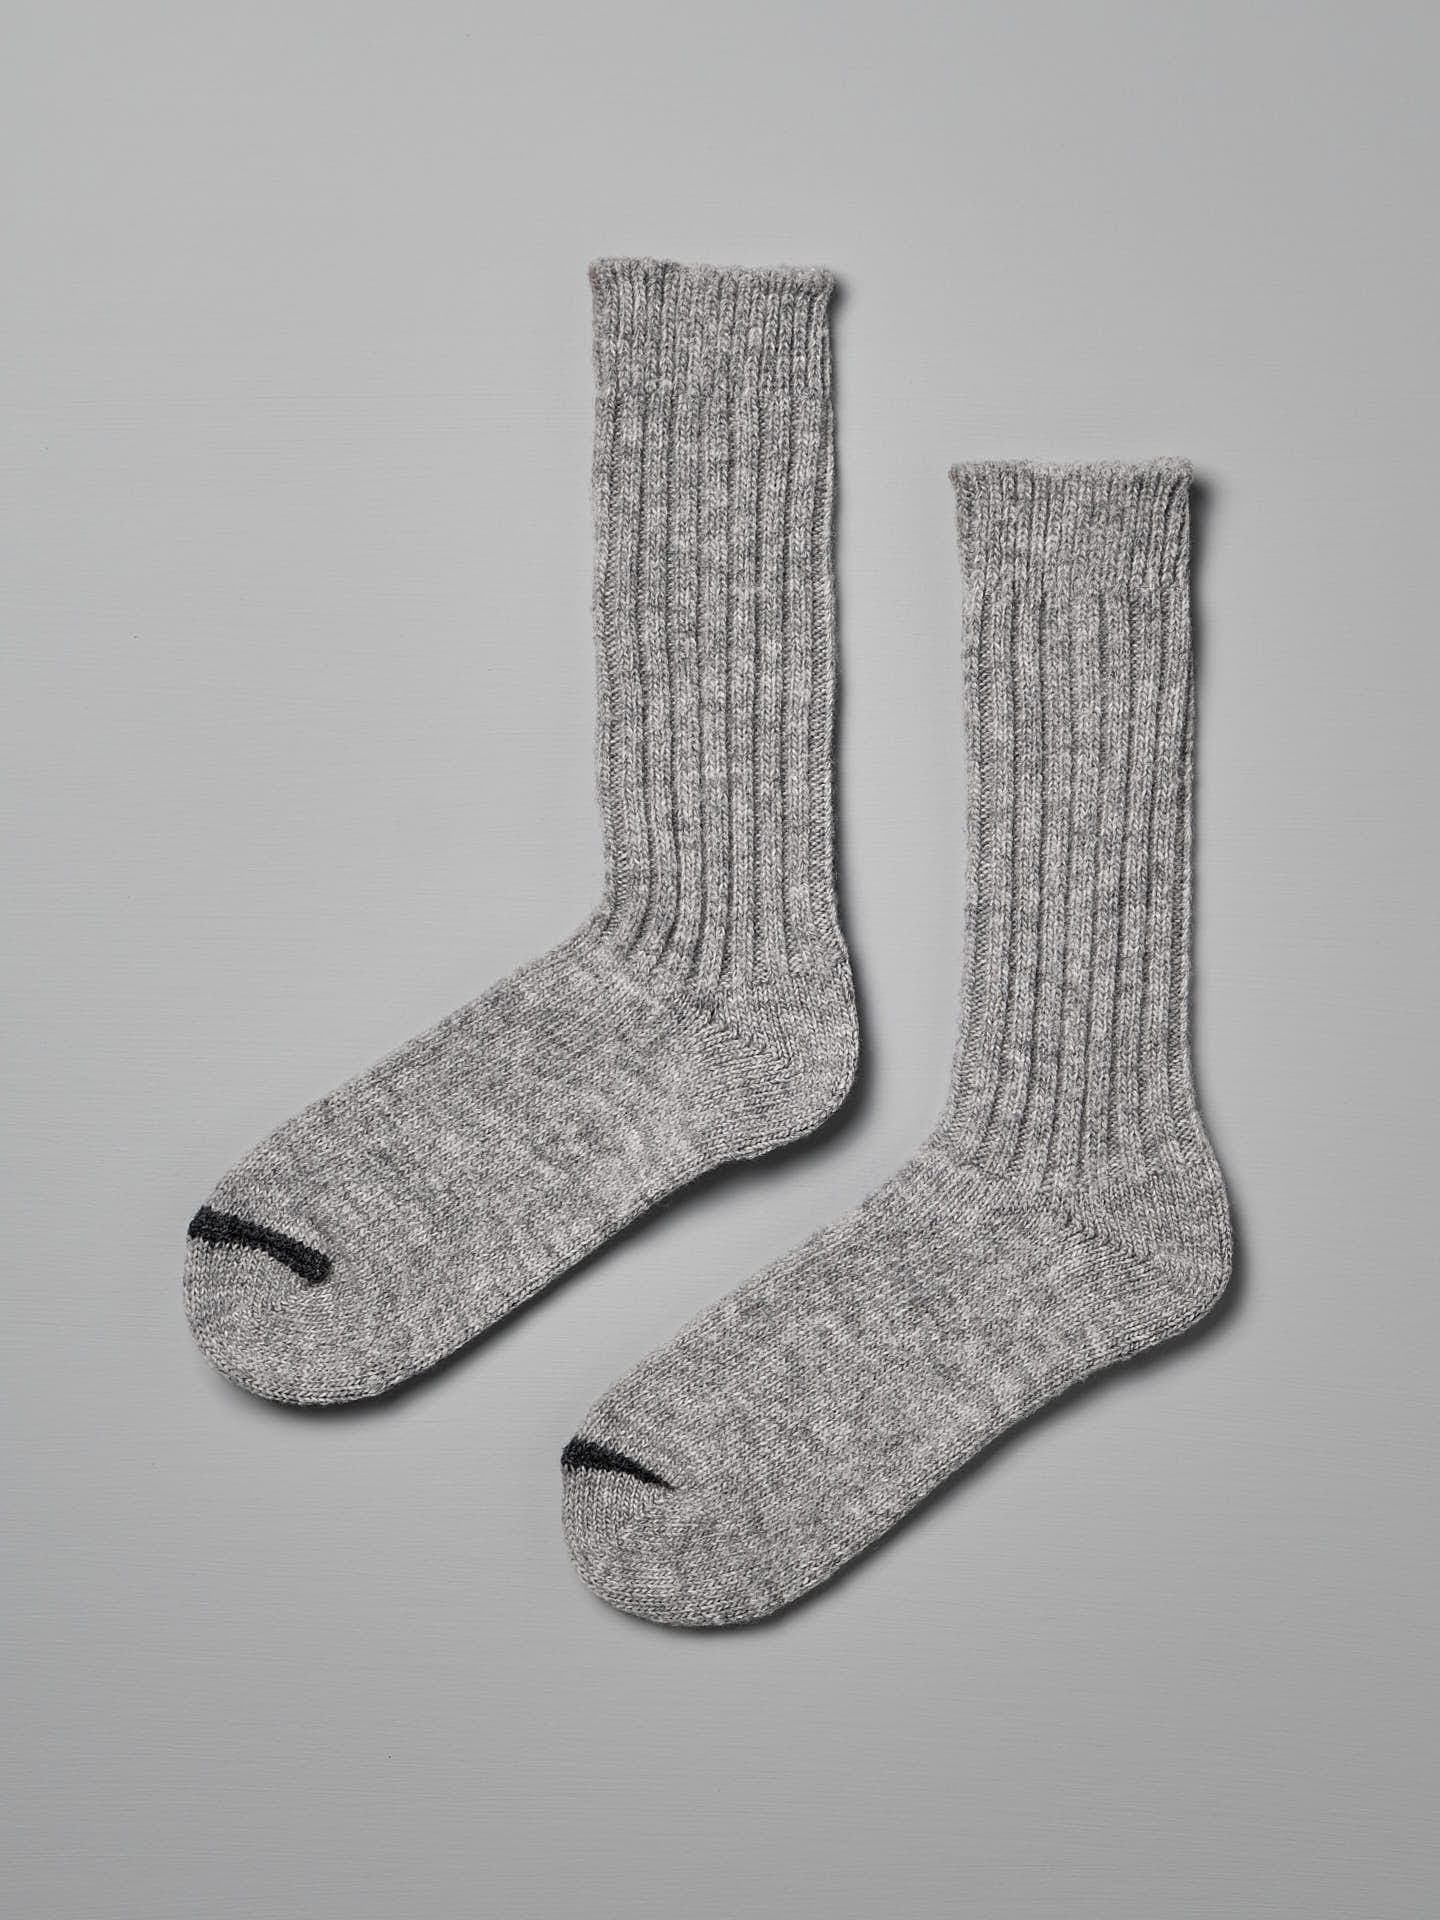 A pair of Praha Wool Ribbed Socks – Light Grey by Nishiguchi Kutsushita with ribbed texture and black toe tips, displayed against a light gray background, ideal for pairing with women's shoes.